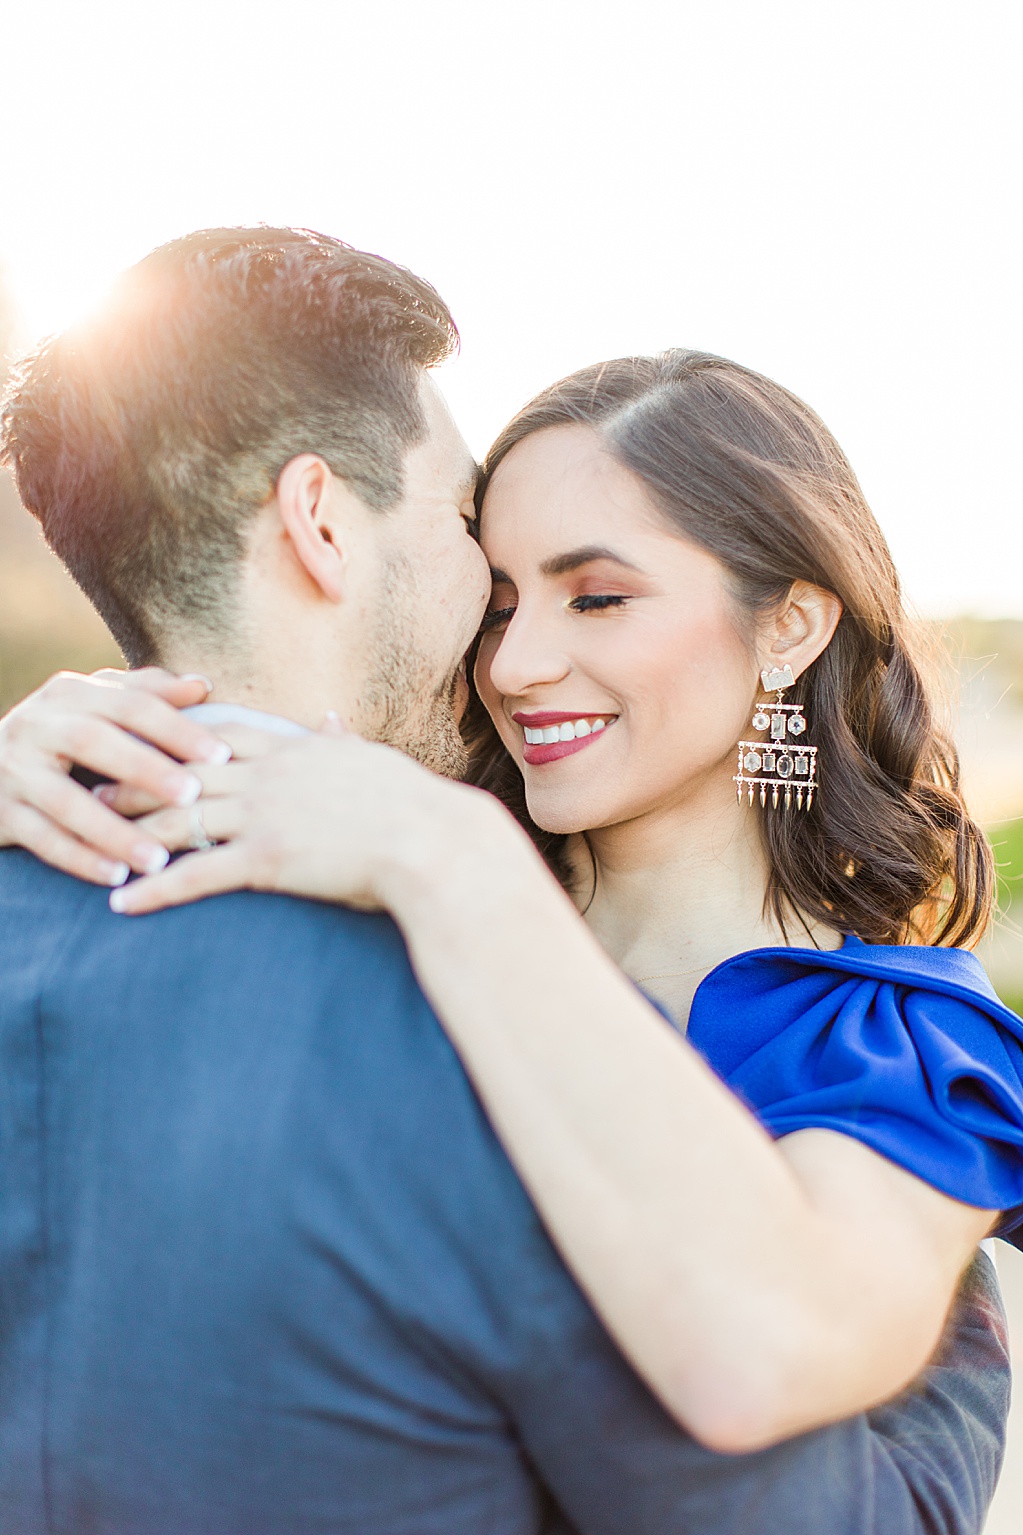 The Gardens of Cranesbury View New Braunfels Engagement Photos by Allison Jeffers Wedding Photography 0095